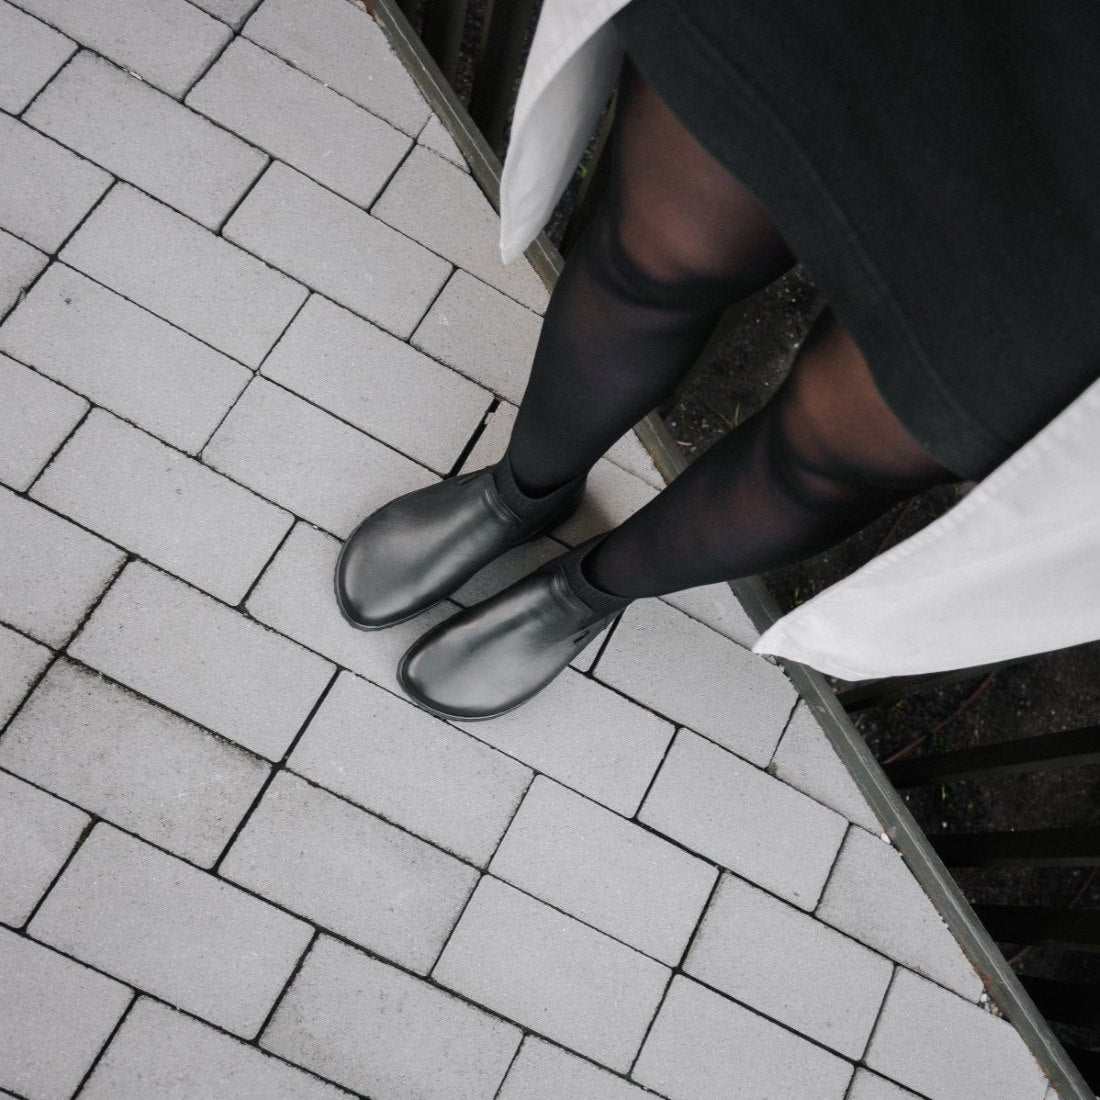 A photo of Be Lenka Mojo boots in black. Boots are made from smooth black leather and a knit opening hugging around the ankle. Both boots are shown from above on a woman's feet. The woman is wearing black stockings and and black skirt is standing on a paved sidewalk. #color_black